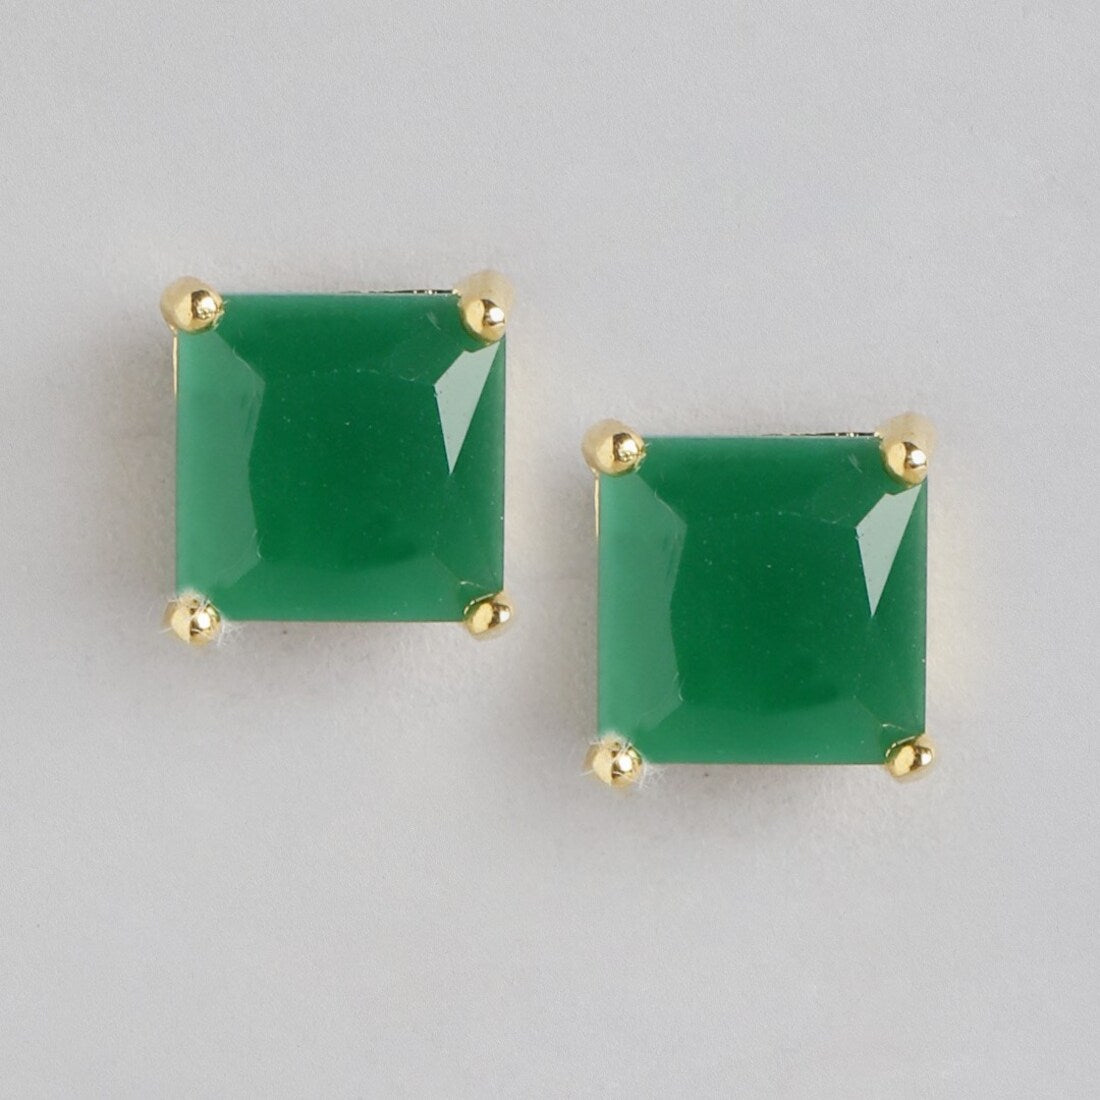 Golden Elegance Gold-Plated 925 Sterling Silver Green Cubic Zirconia Stud Earrings